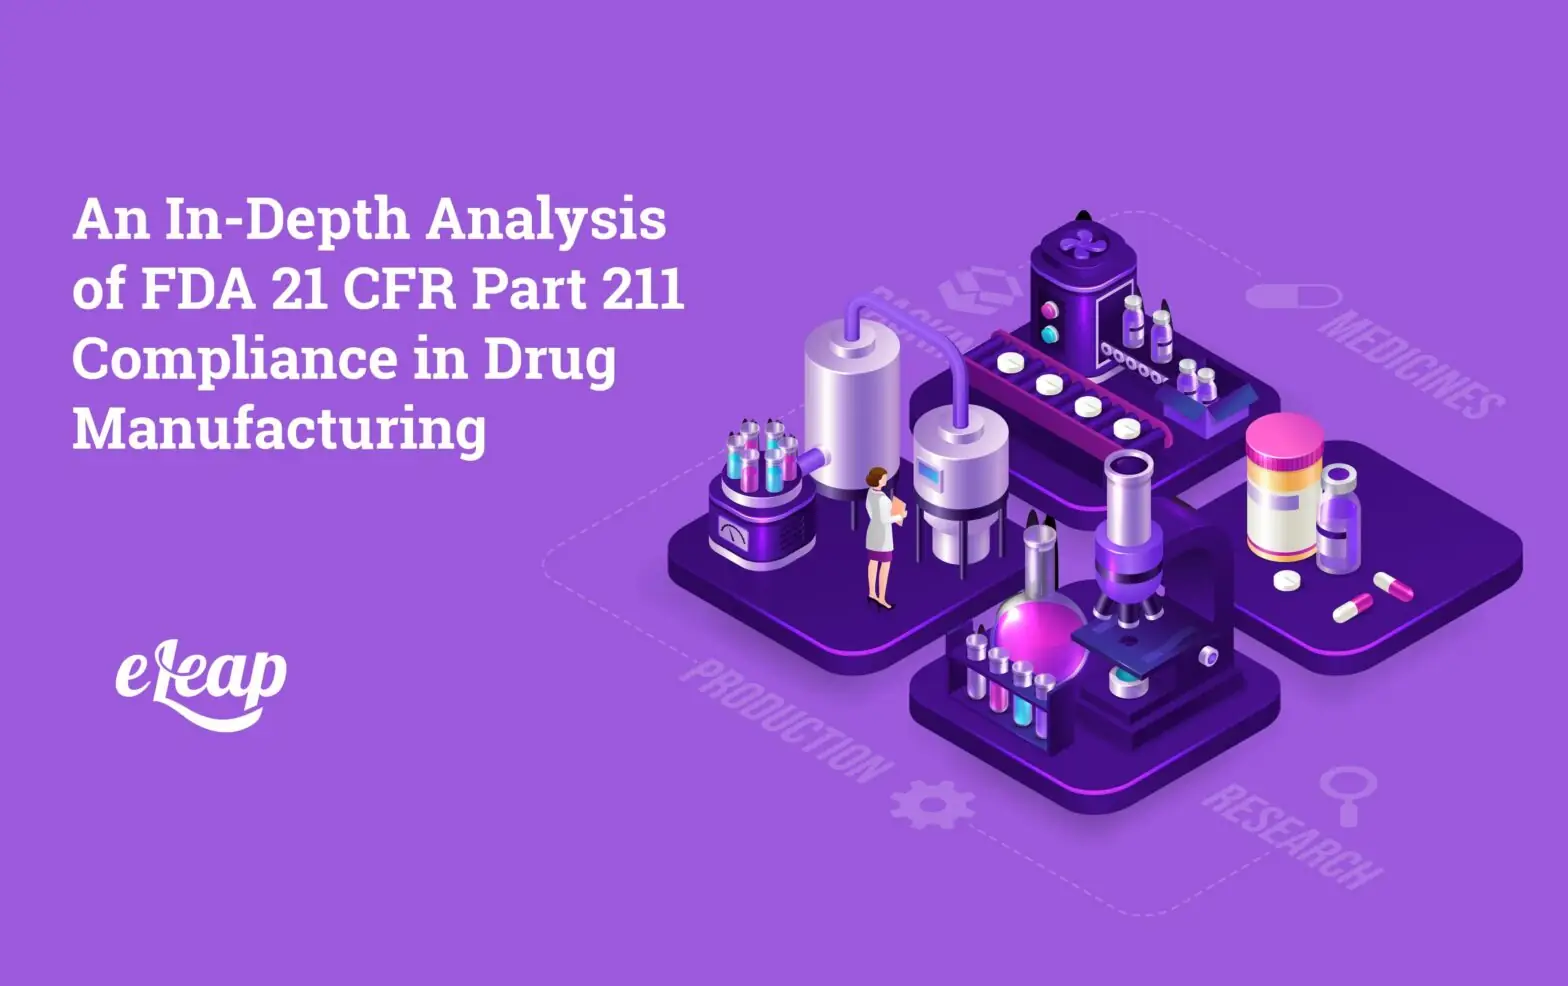 An In-Depth Analysis of FDA 21 CFR Part 211 Compliance in Drug Manufacturing